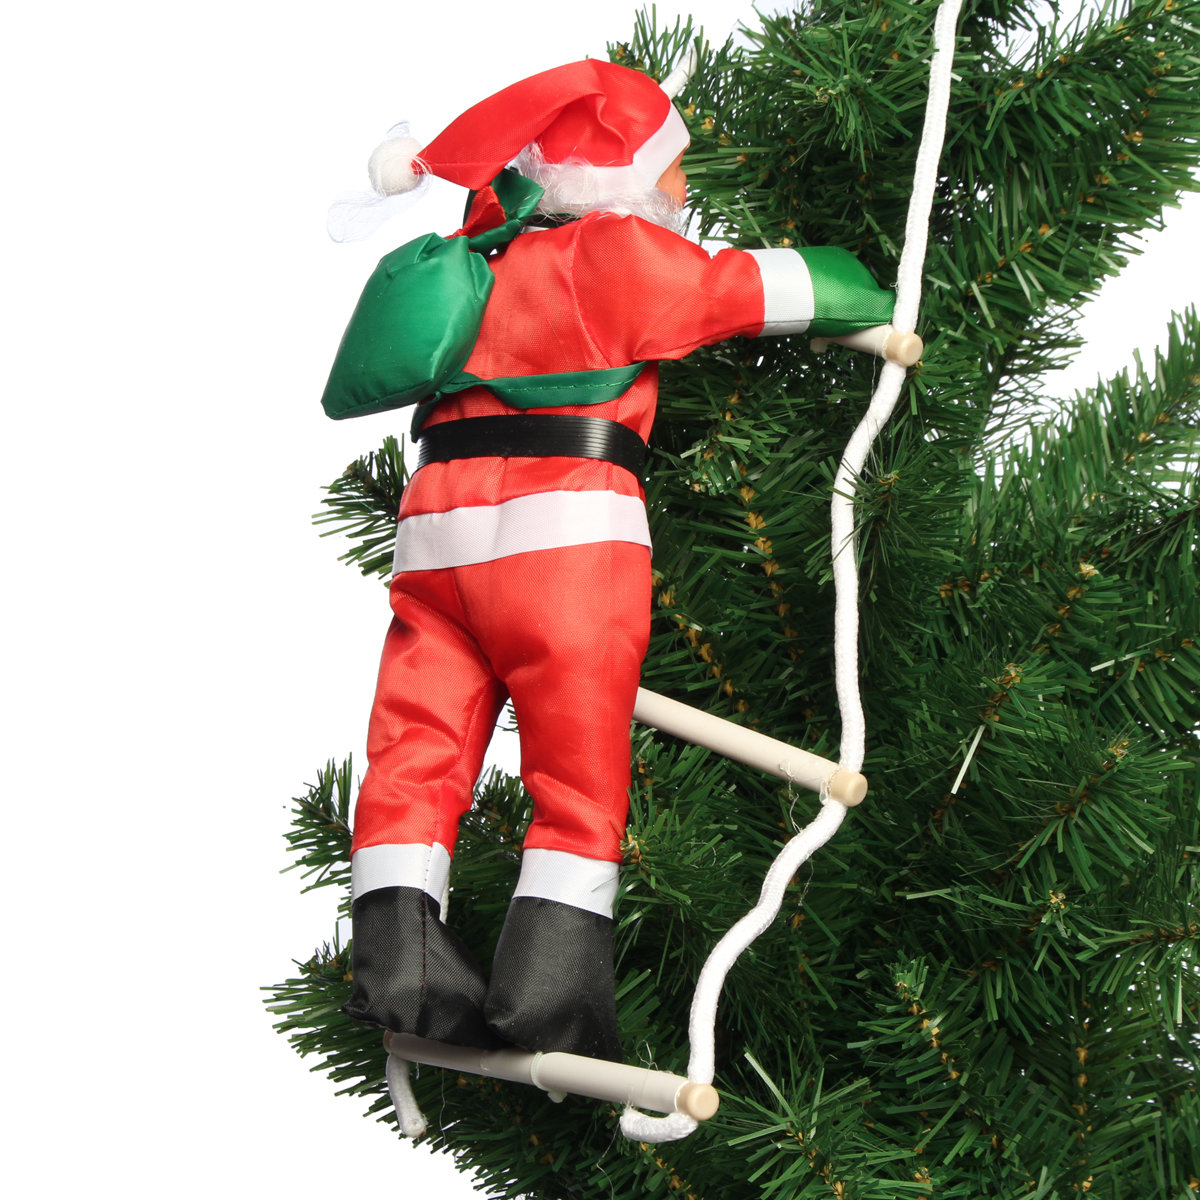 Climbing Santa With Rope Ladder Outdoor Christmas Home Party Decorations